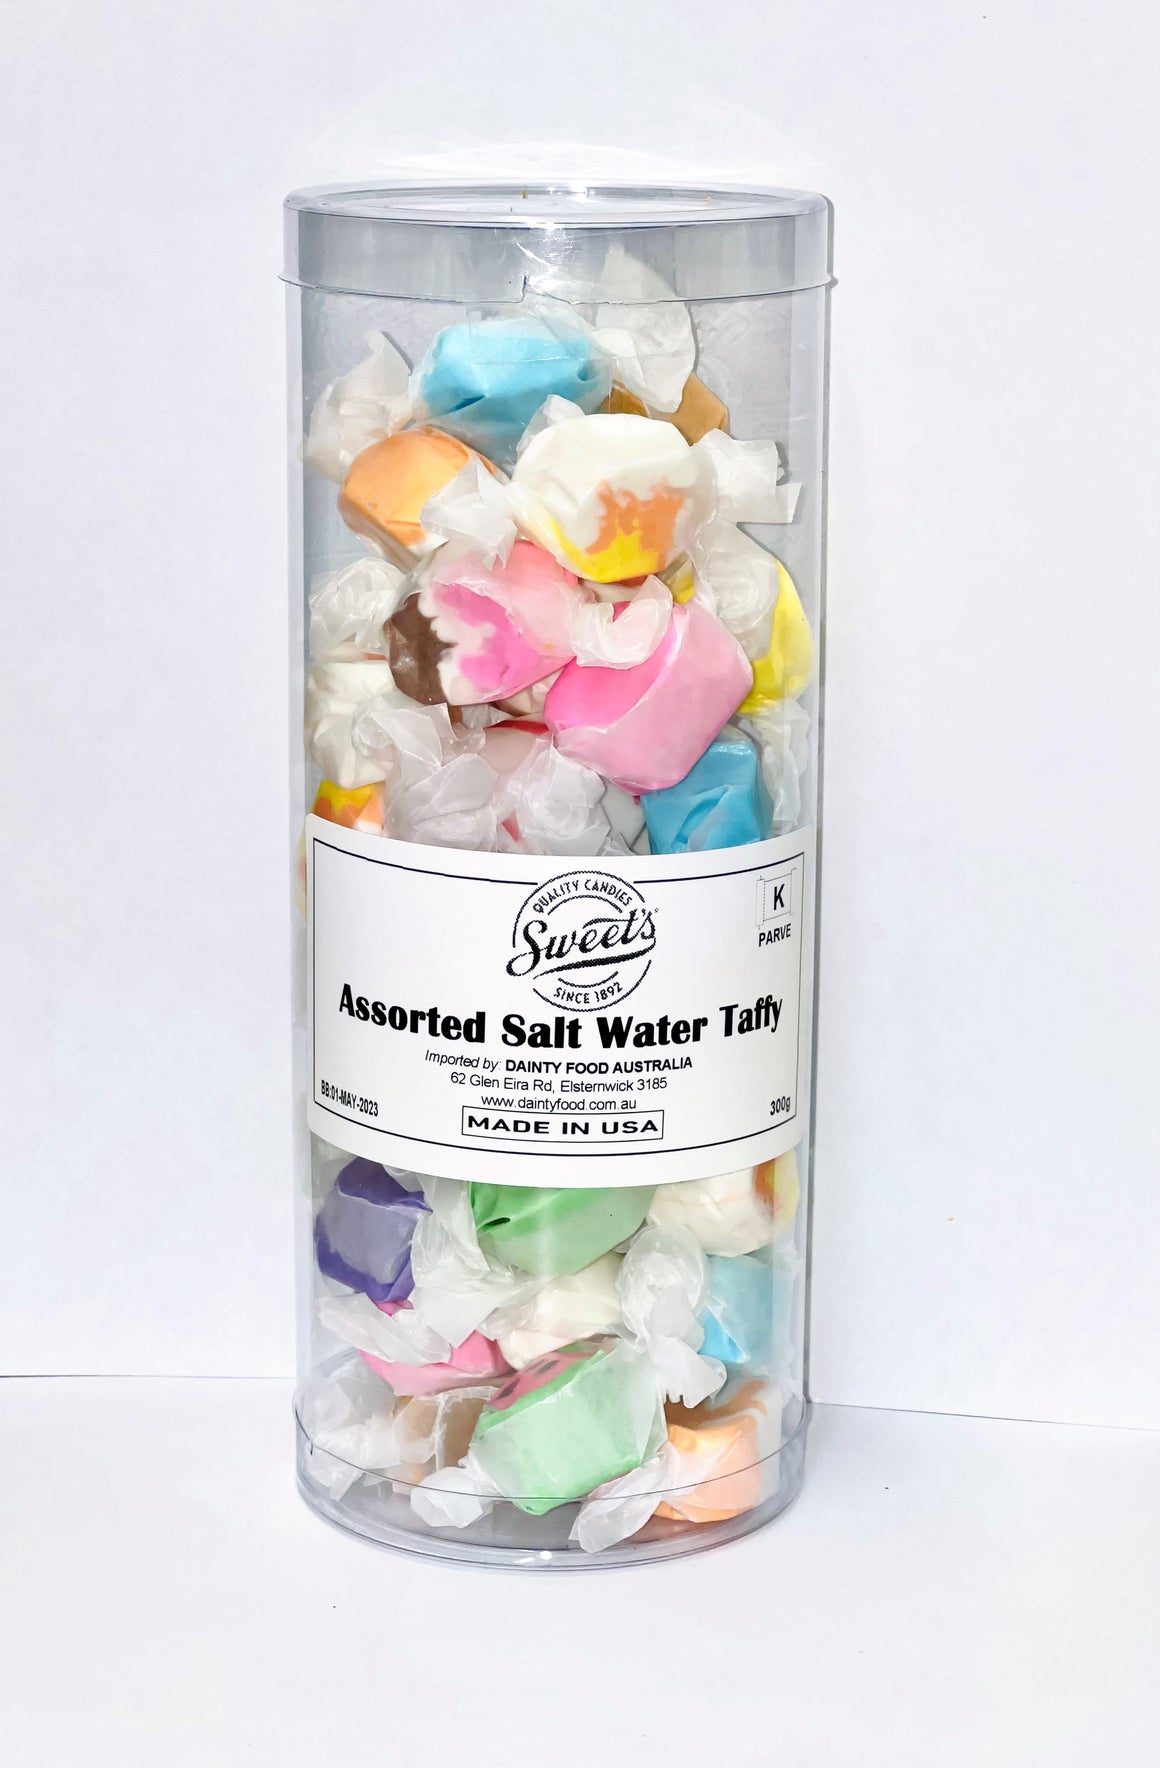 SWEETS TAFFY ASSORTED FLAVOUR 300G